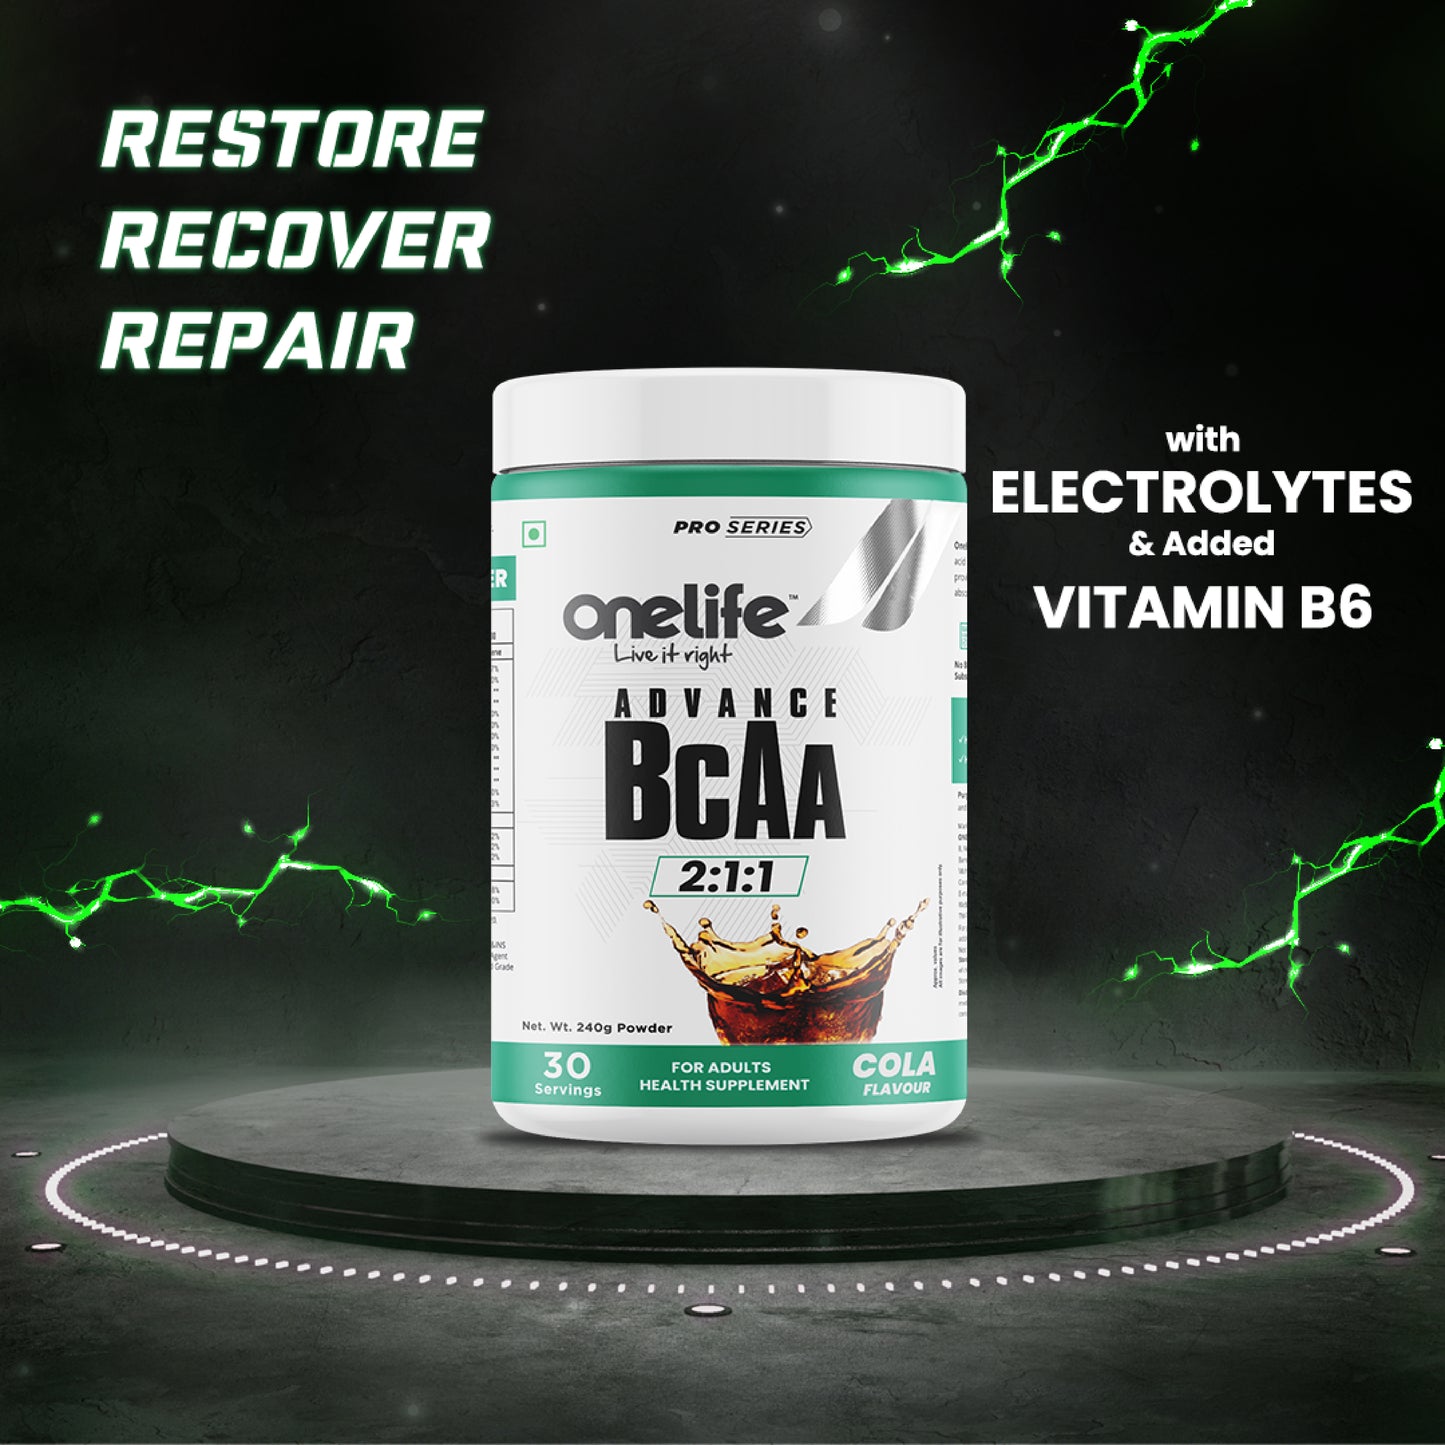 Onelife ADVANCE BCAA, 5g BCAAs 2:1:1 : Lean Muscle growth & recovery I Replenishes Electrolytes with Added Vitamin B6 - (Free from banned substances, GMO & Gluten) I Cola 240gm I 30Servings